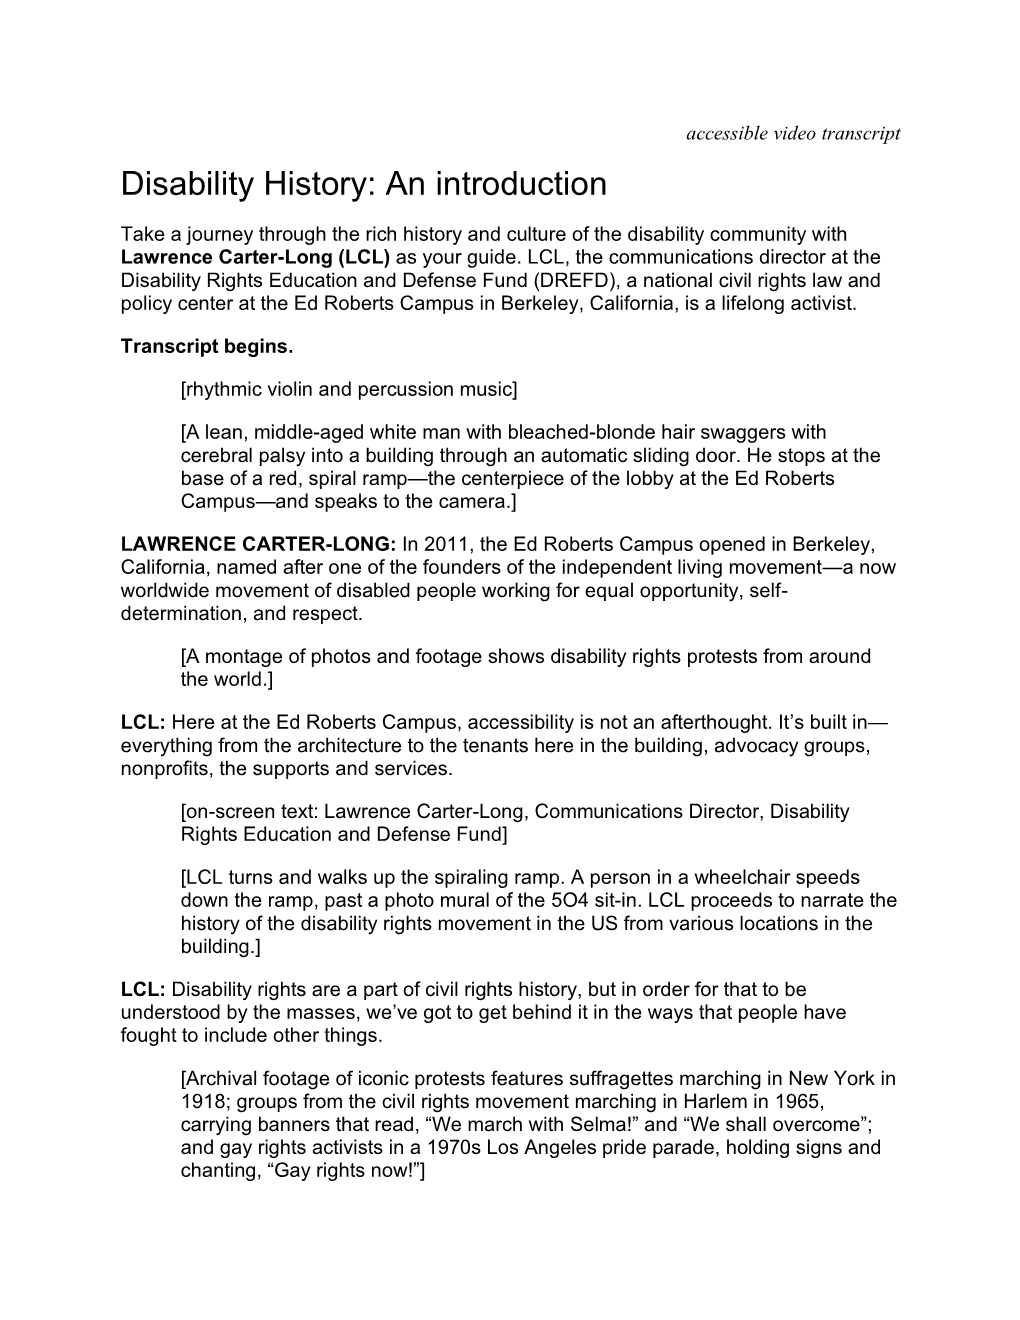 Disability History: an Introduction